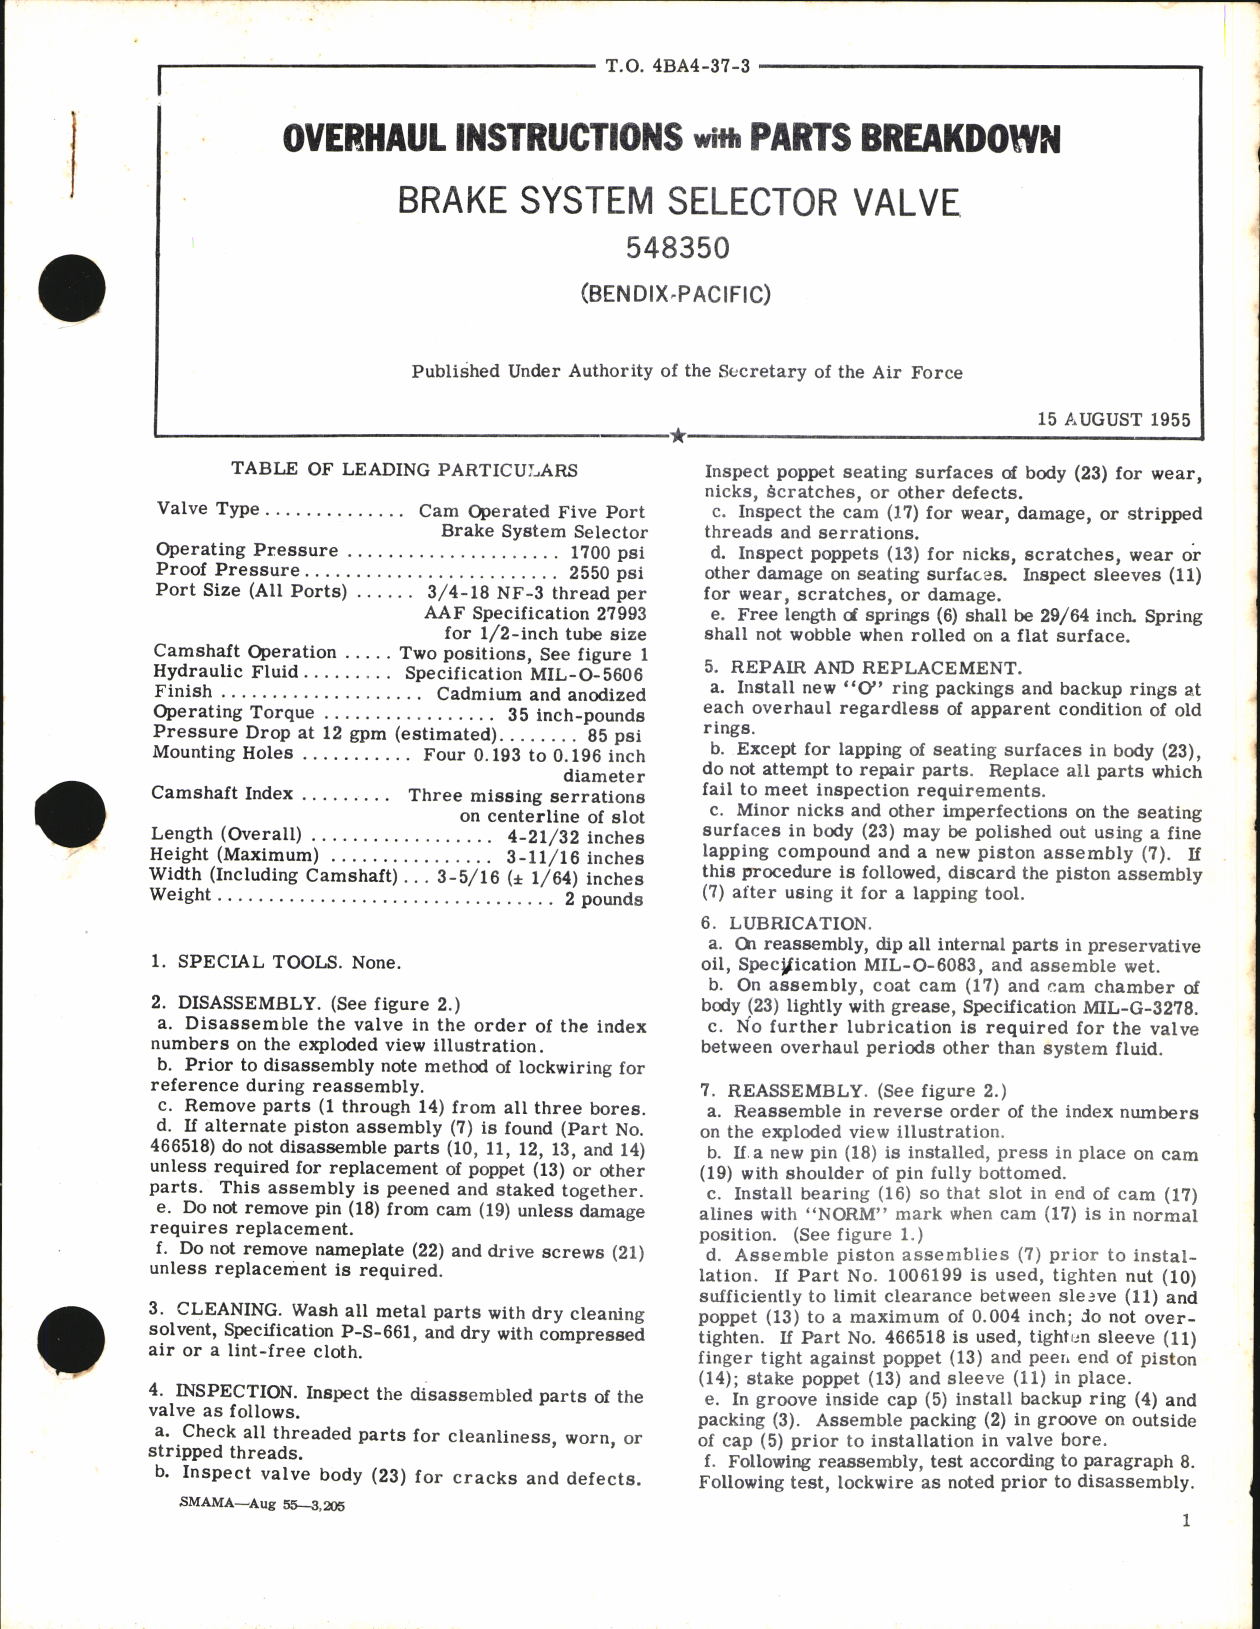 Sample page 1 from AirCorps Library document: Overhaul Instructions with Parts Breakdown for Brake System Selector Valve